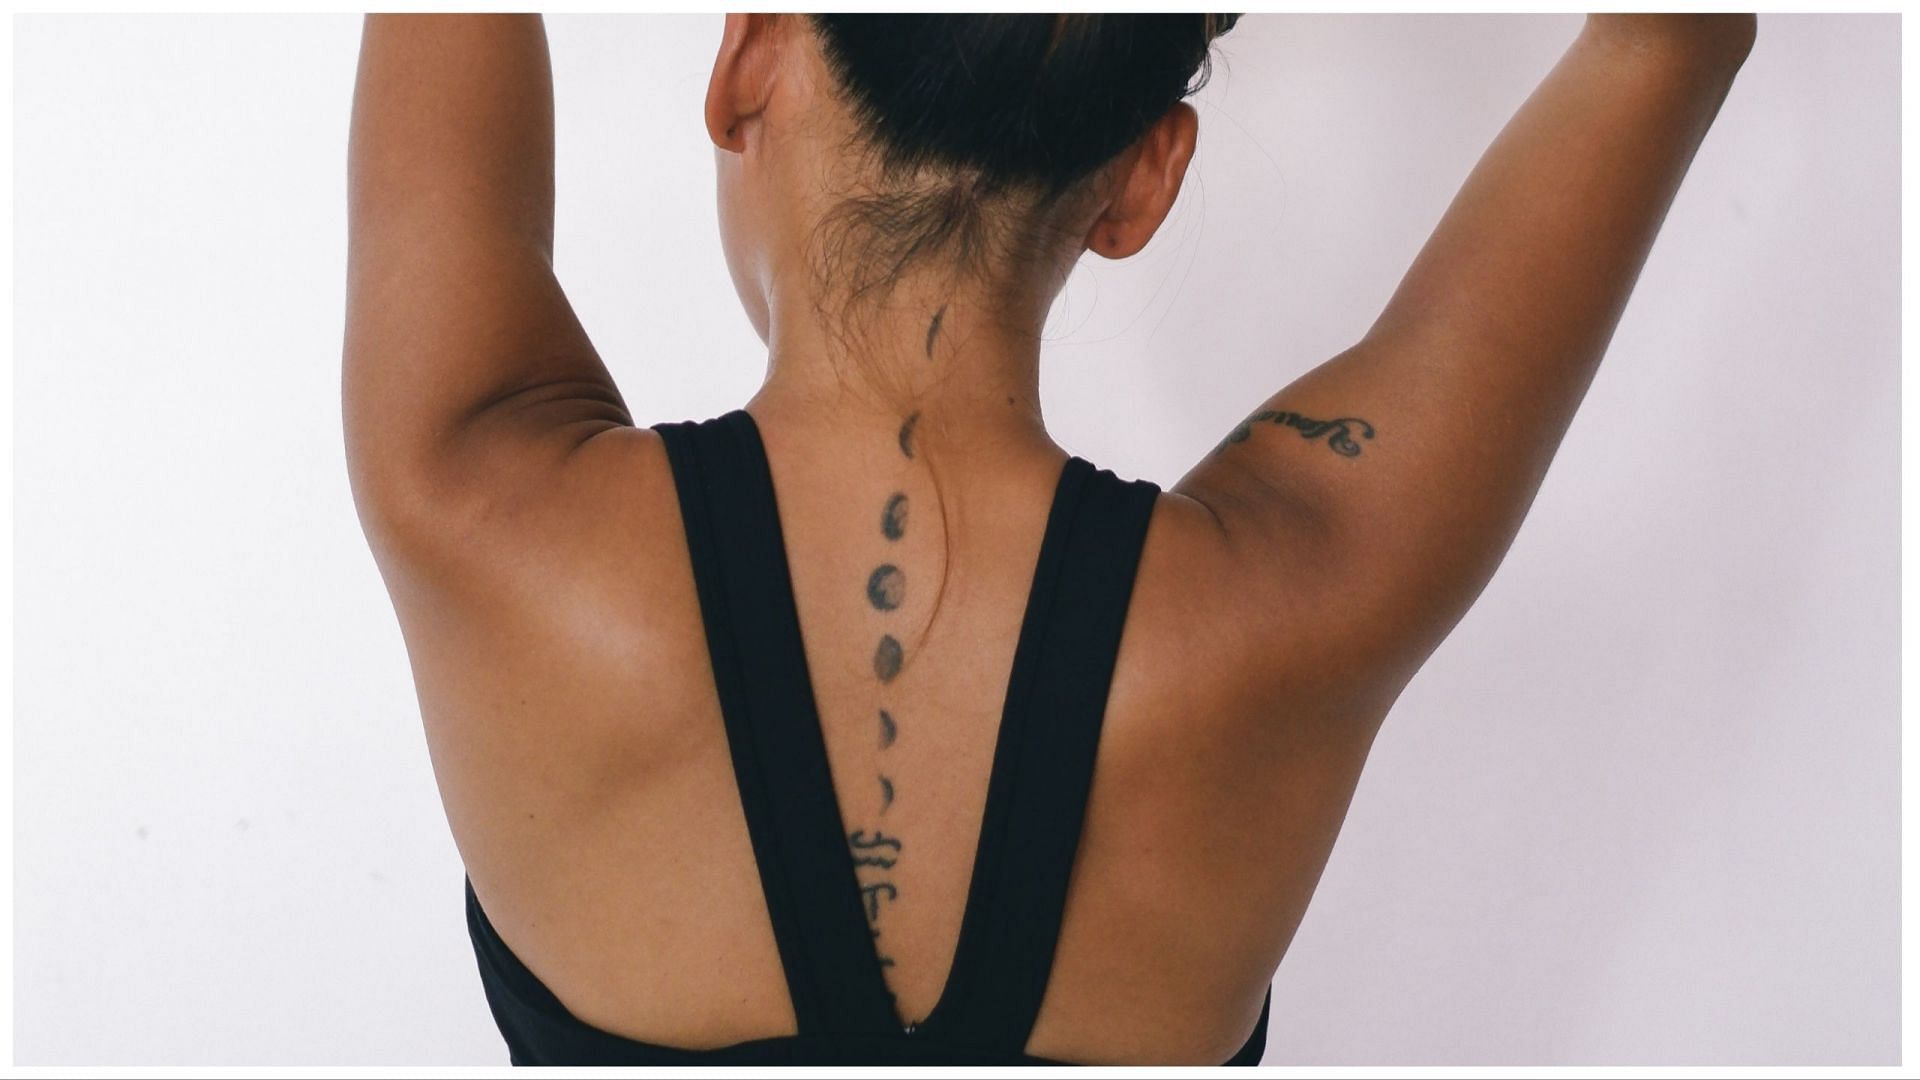 Life comes to a full circle eventually, and this tattoo represents this cycle. (Image via Unsplash/ Emy)